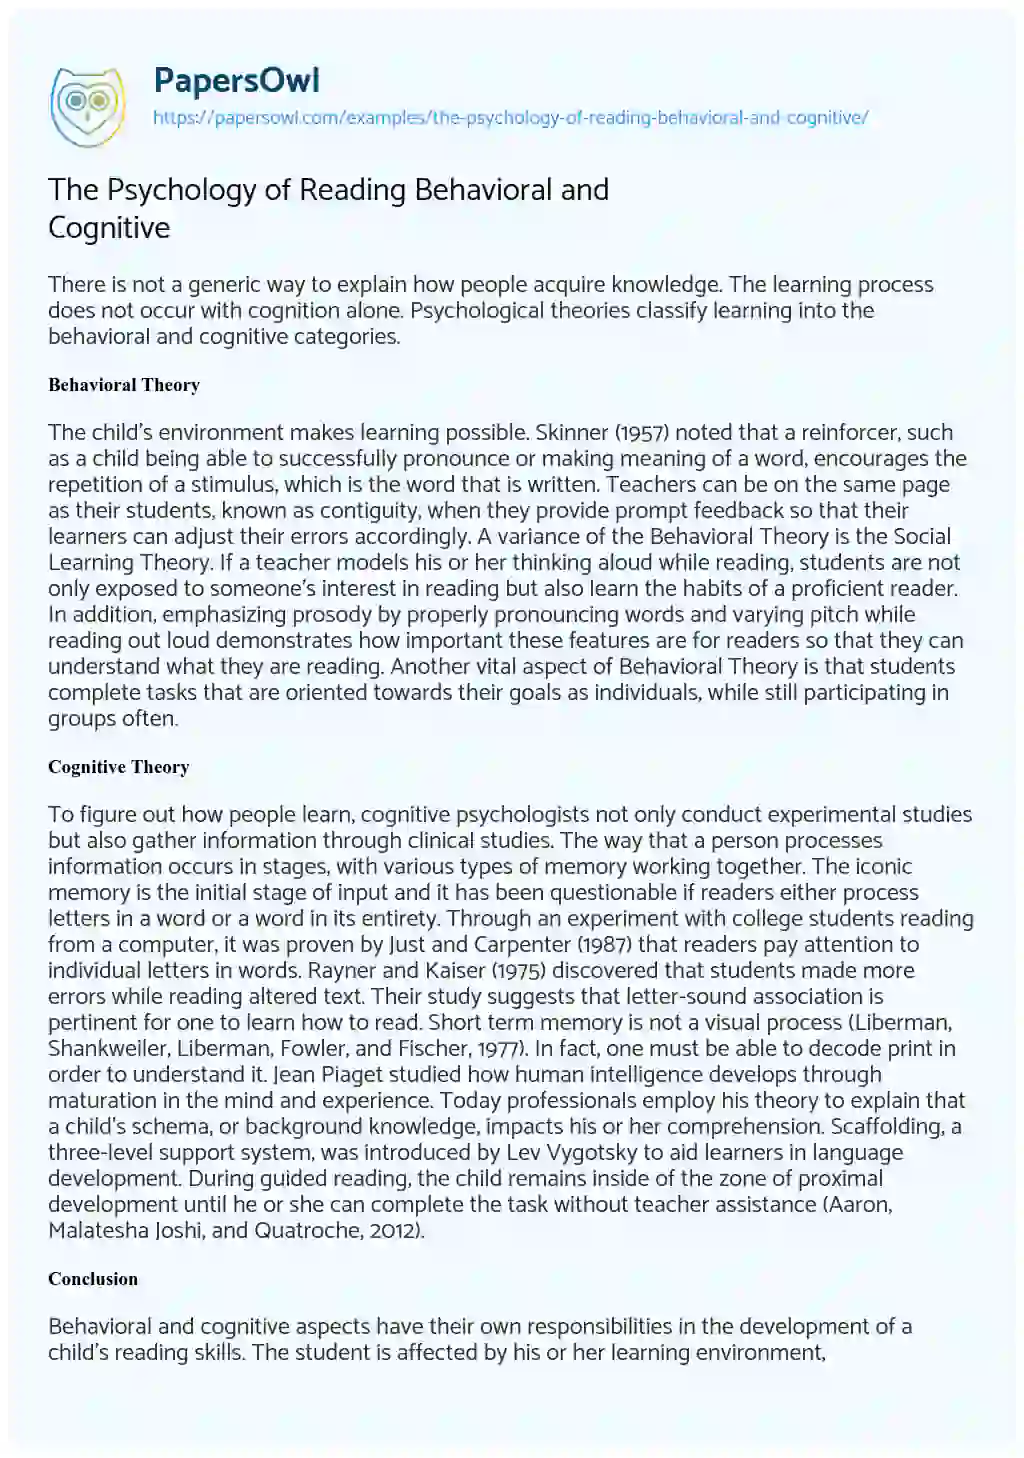 Essay on The Psychology of Reading Behavioral and Cognitive